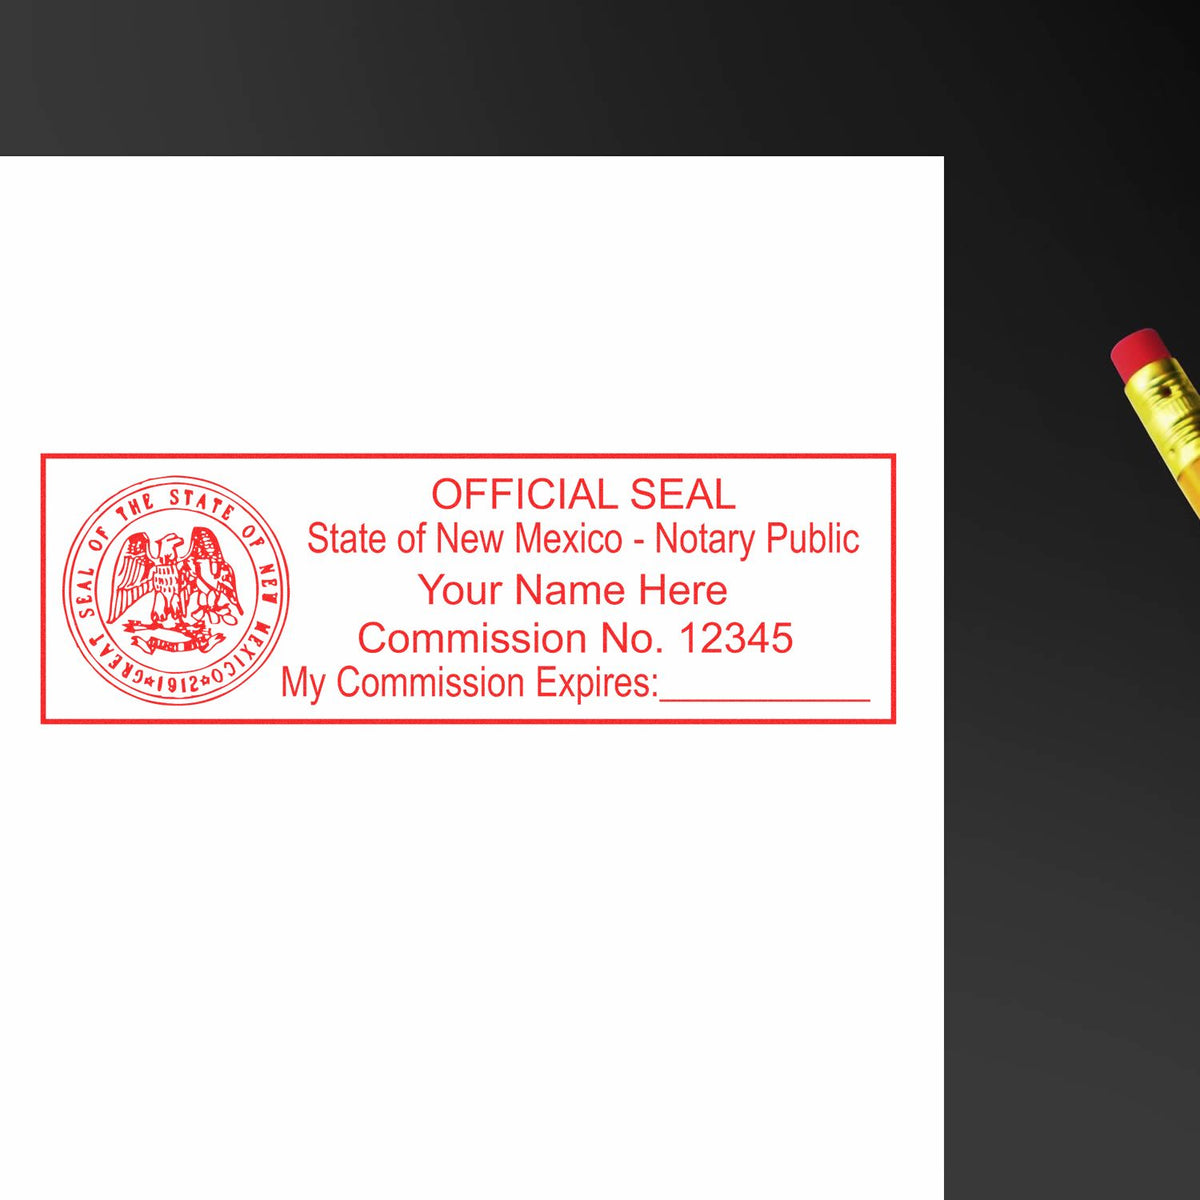 The Heavy-Duty New Mexico Rectangular Notary Stamp stamp impression comes to life with a crisp, detailed photo on paper - showcasing true professional quality.